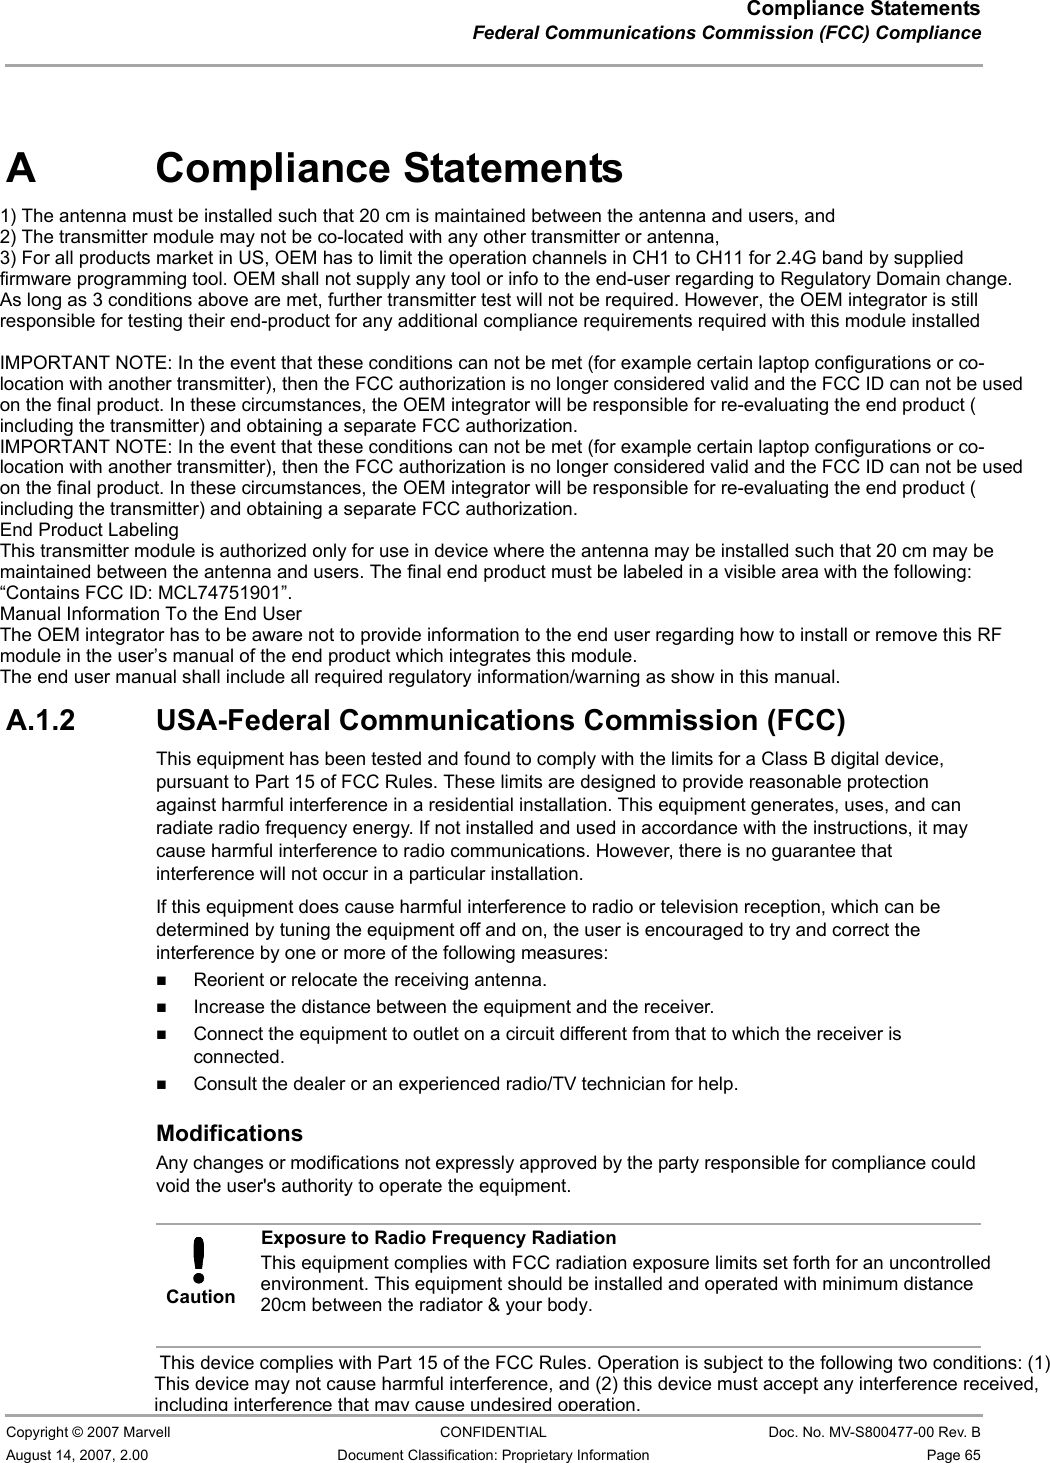 Compliance StatementsFederal Communications Commission (FCC) Compliance                         Copyright © 2007 Marvell CONFIDENTIAL Doc. No. MV-S800477-00 Rev. BAugust 14, 2007, 2.00 Document Classification: Proprietary Information Page 65 A Compliance StatementsA.1 Federal Communications Commission (FCC) ComplianceA.1.1 Transmitter Module Approval ConditionsAntennas must be installed to provide 20 cm separation distance from the transmitting antenna to the body of the user during normal operating condition. This device must not be co-located or operating in conjunction with any other antenna or transmitter.Only those antennas filed under FCC ID:UAY-MMC85M can be used with this device.When the module is installed in the final system where the antenna location is less than 20 cm separation distance to the body of user, additional equipment authorization must be applied.FCC ID label on the final system must be labeled with “Contains FCC ID:UAY-MMC85M” or “Contains transmitter module FCC ID:UAY-MMC85M”.In the user guide, final system integrator must be ensure that there is no instruction provided in the user guide to install or remove the transmitter module.The transmitter module must be installed and used in strict accordance with the manufacturer&apos;s instructions as described in the user documentation that comes with the product. This device complies with the following radio frequency and safety standards.A.1.2 USA-Federal Communications Commission (FCC) This equipment has been tested and found to comply with the limits for a Class B digital device, pursuant to Part 15 of FCC Rules. These limits are designed to provide reasonable protection against harmful interference in a residential installation. This equipment generates, uses, and can radiate radio frequency energy. If not installed and used in accordance with the instructions, it may cause harmful interference to radio communications. However, there is no guarantee that interference will not occur in a particular installation.If this equipment does cause harmful interference to radio or television reception, which can be determined by tuning the equipment off and on, the user is encouraged to try and correct the interference by one or more of the following measures:Reorient or relocate the receiving antenna.Increase the distance between the equipment and the receiver.Connect the equipment to outlet on a circuit different from that to which the receiver is connected.Consult the dealer or an experienced radio/TV technician for help.ModificationsAny changes or modifications not expressly approved by the party responsible for compliance could void the user&apos;s authority to operate the equipment.CautionExposure to Radio Frequency RadiationTo comply with FCC RF exposure compliance requirements, a separation distance of at least 20 cm must be maintained between the antenna of this device and all persons. This device must not be co-located or operating in conjunction with any other antenna or transmitter. This device complies with Part 15 of the FCC Rules. Operation is subject to the following two conditions: (1) This device may not cause harmful interference, and (2) this device must accept any interference received, including interference that may cause undesired operation.This equipment complies with FCC radiation exposure limits set forth for an uncontrolled environment. This equipment should be installed and operated with minimum distance 20cm between the radiator &amp; your body.1) The antenna must be installed such that 20 cm is maintained between the antenna and users, and 2) The transmitter module may not be co-located with any other transmitter or antenna, 3) For all products market in US, OEM has to limit the operation channels in CH1 to CH11 for 2.4G band by supplied firmware programming tool. OEM shall not supply any tool or info to the end-user regarding to Regulatory Domain change.As long as 3 conditions above are met, further transmitter test will not be required. However, the OEM integrator is still responsible for testing their end-product for any additional compliance requirements required with this module installedIMPORTANT NOTE: In the event that these conditions can not be met (for example certain laptop configurations or co-location with another transmitter), then the FCC authorization is no longer considered valid and the FCC ID can not be used on the final product. In these circumstances, the OEM integrator will be responsible for re-evaluating the end product (including the transmitter) and obtaining a separate FCC authorization.IMPORTANT NOTE: In the event that these conditions can not be met (for example certain laptop configurations or co-location with another transmitter), then the FCC authorization is no longer considered valid and the FCC ID can not be used on the final product. In these circumstances, the OEM integrator will be responsible for re-evaluating the end product (including the transmitter) and obtaining a separate FCC authorization.End Product LabelingThis transmitter module is authorized only for use in device where the antenna may be installed such that 20 cm may be maintained between the antenna and users. The final end product must be labeled in a visible area with the following: “Contains FCC ID: MCL74751901”.Manual Information To the End UserThe OEM integrator has to be aware not to provide information to the end user regarding how to install or remove this RF module in the user’s manual of the end product which integrates this module.The end user manual shall include all required regulatory information/warning as show in this manual.